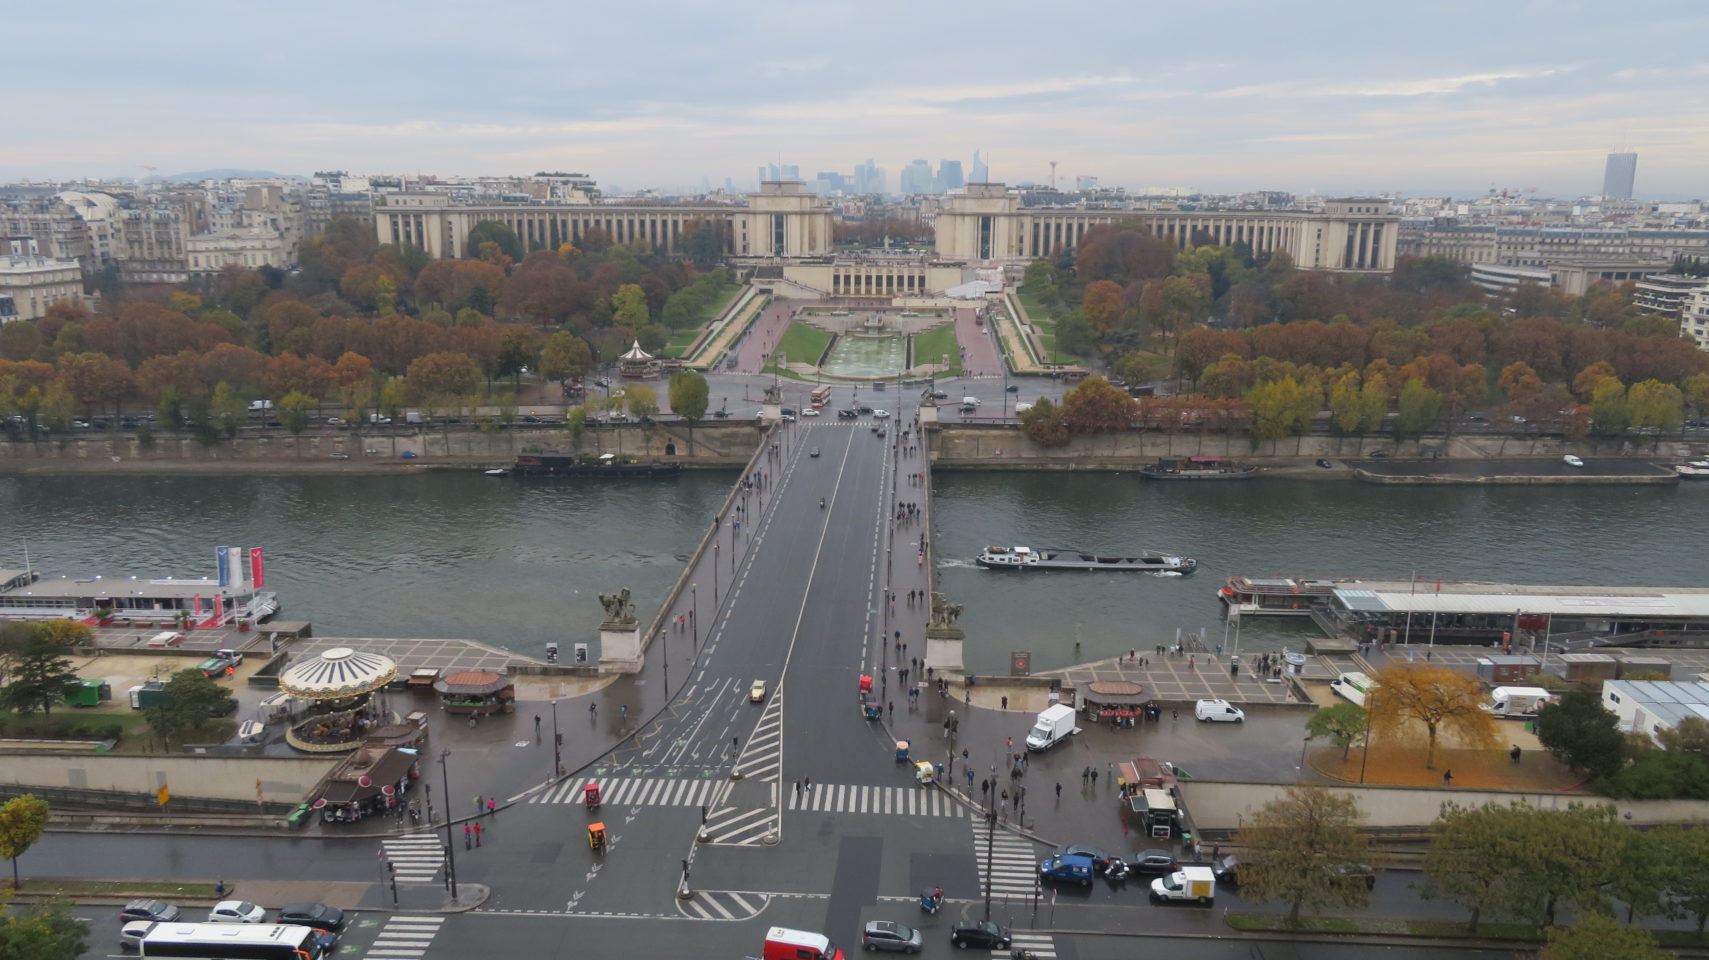 Trocadero and Paris viewed from the Eiffel Tower ( Paris and Normandie AMAWaterways Cruise)